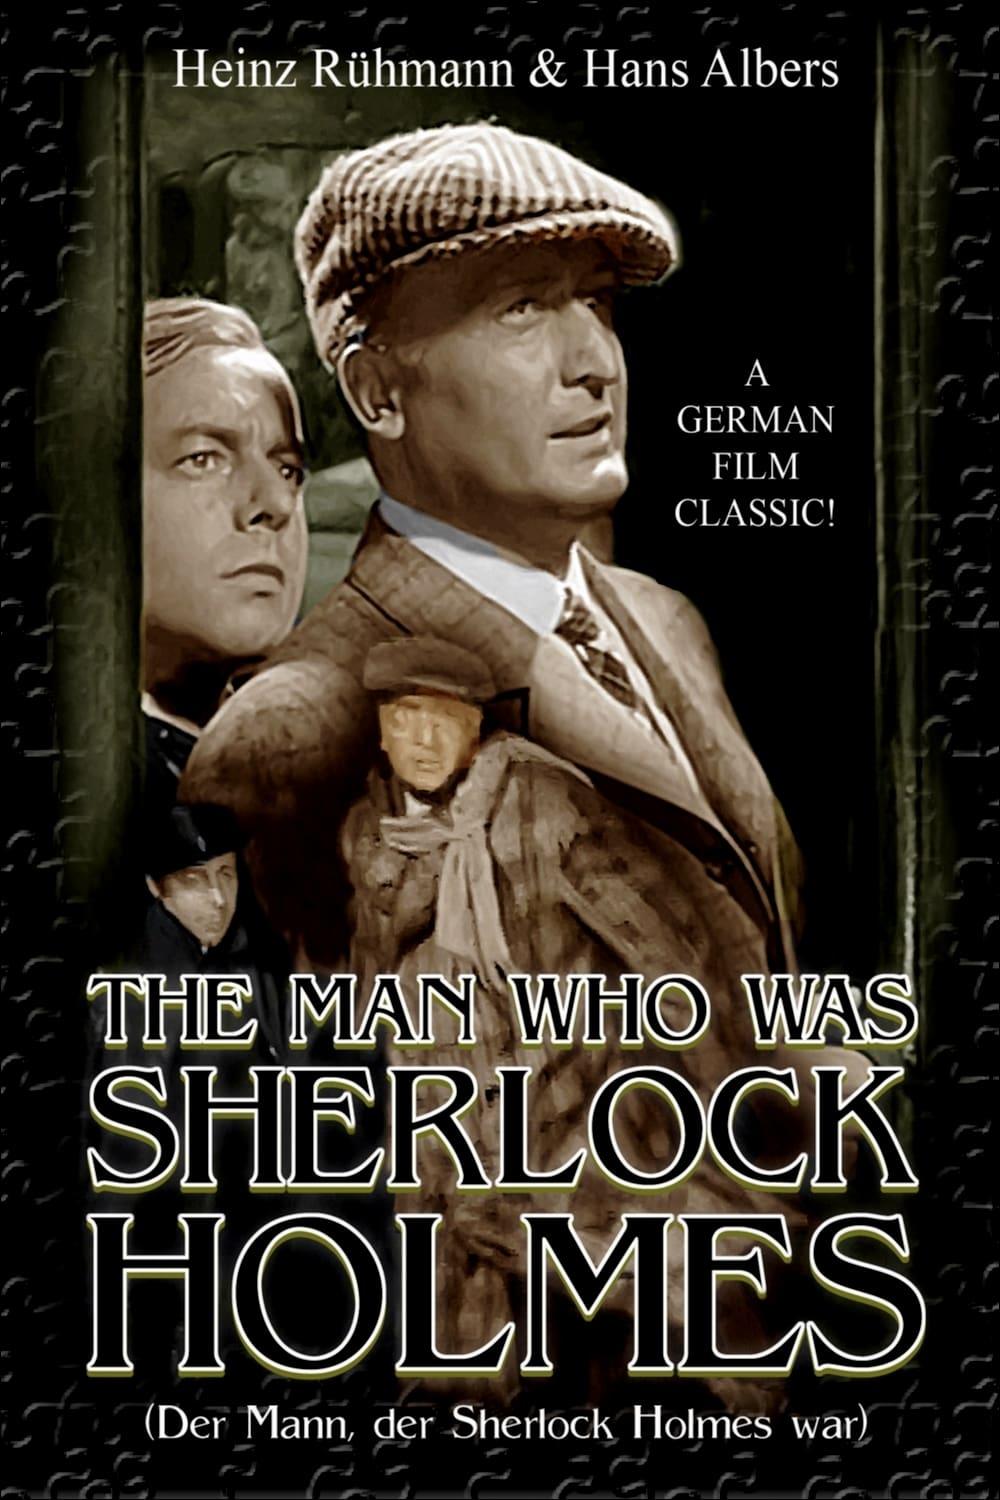 The Man Who Was Sherlock Holmes poster